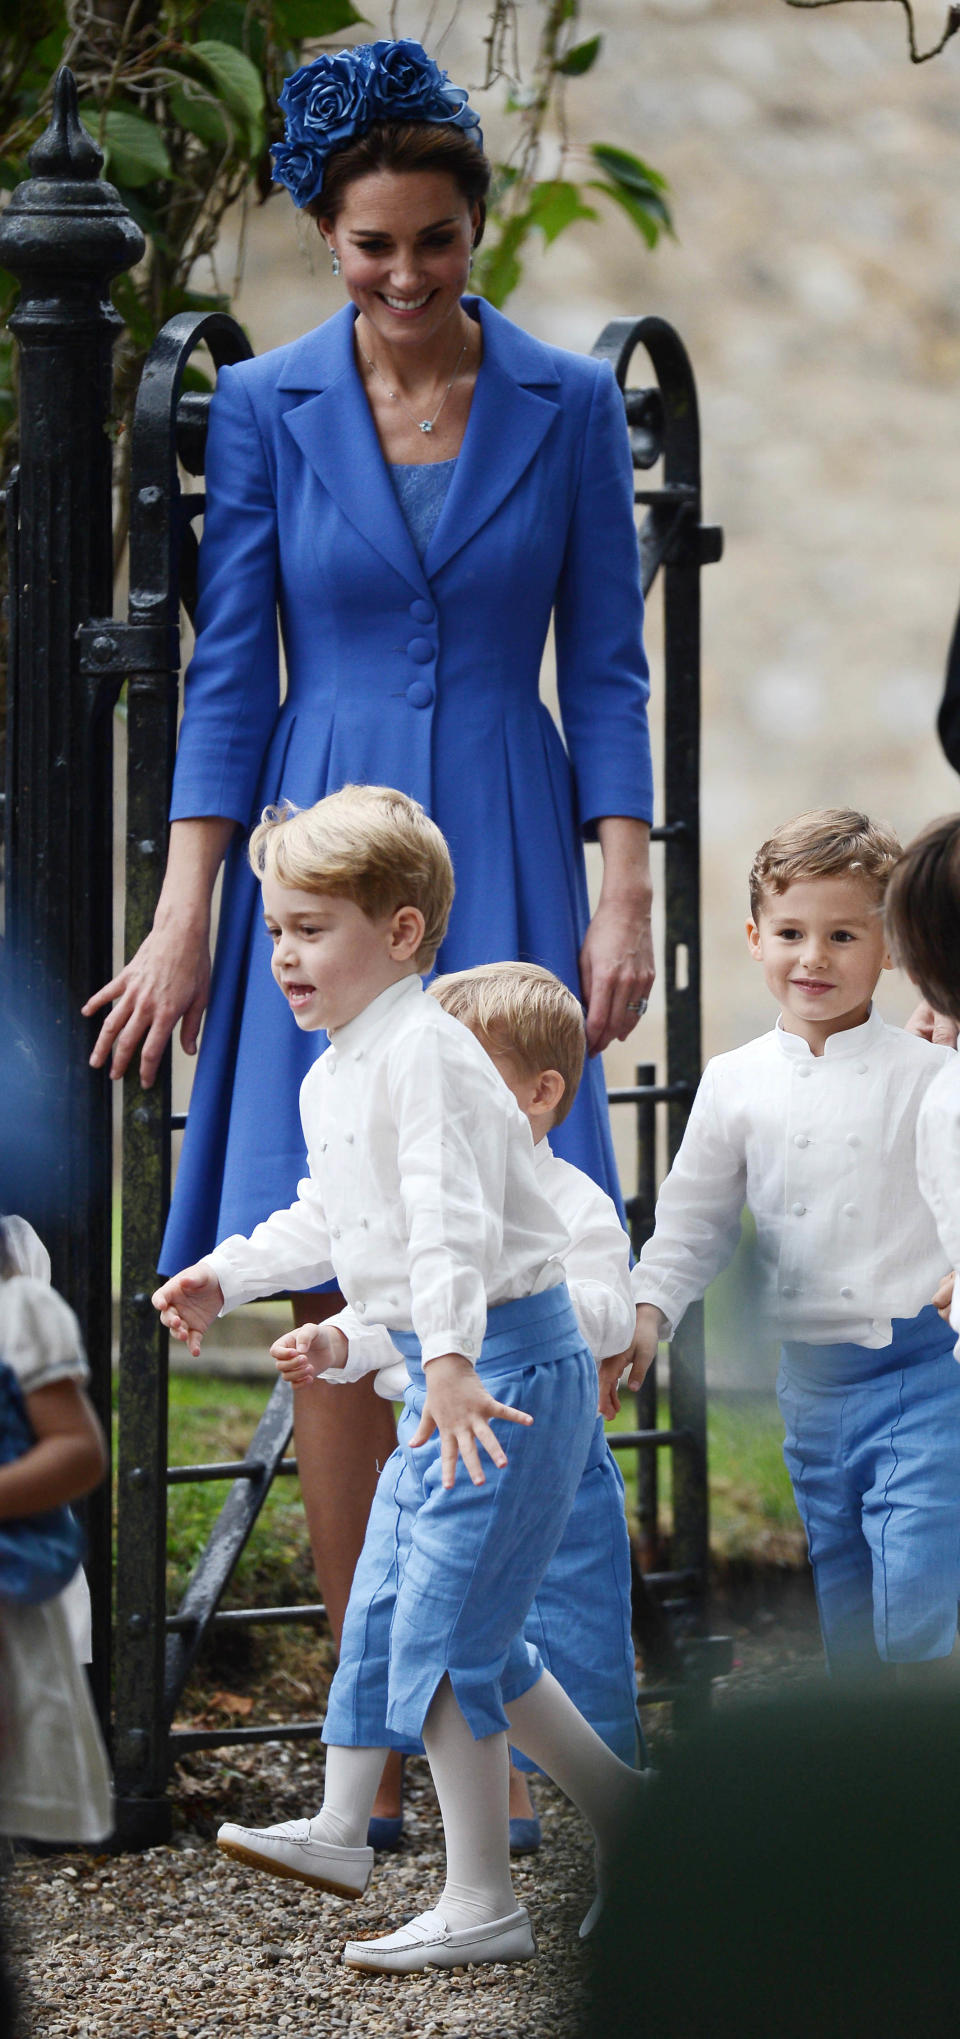 <p>Prince George looked like he was having the time of his life as she joyfully played outside St. Andrew’s Episcopal Church in Norfolk with the rest of the bridal party. Photo: Australscope </p>